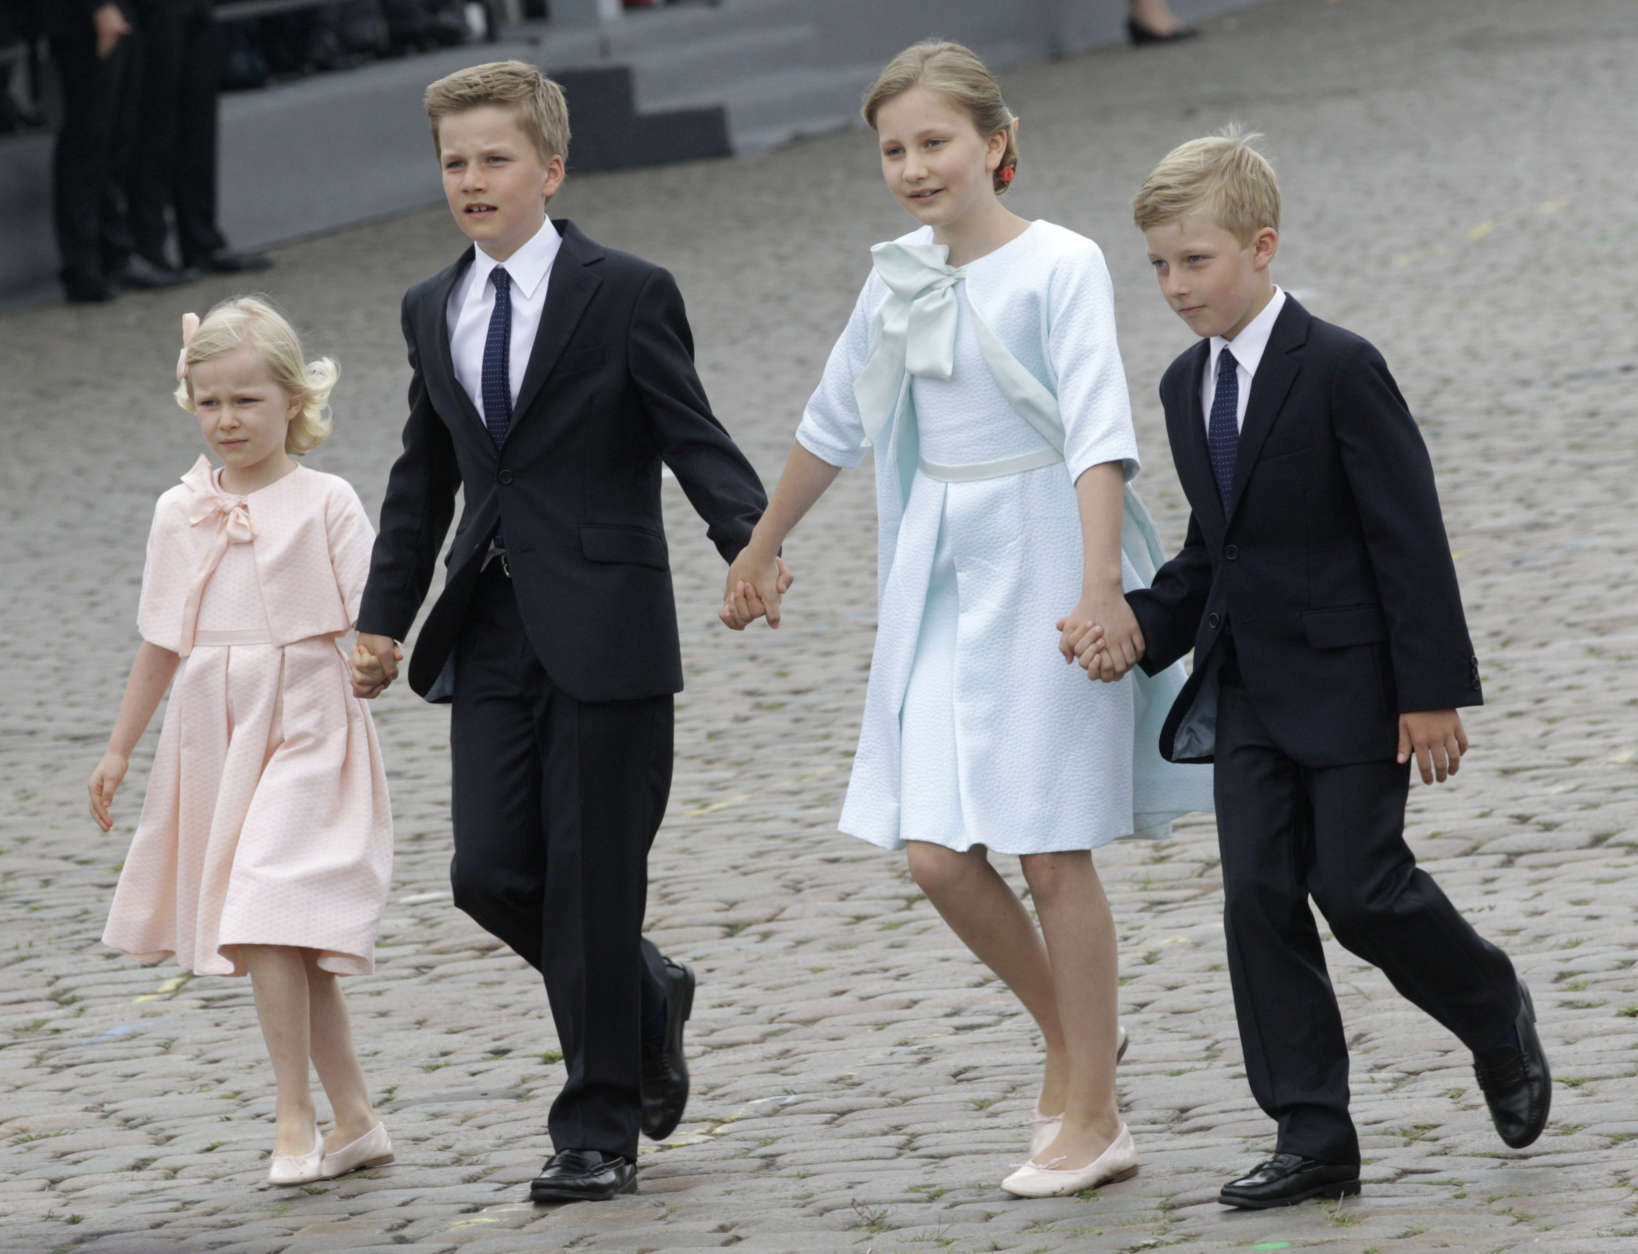 Belgium's Crown Princess Elisabeth, second right, walks with her brothers Gabriel, second left, and Emmanuel, right, and her sister Eleonore, left, during a military parade on Belgian National Day, in front of the Royal Palace in Brussels, Monday, July 21, 2014. (AP Photo/Yves Logghe)